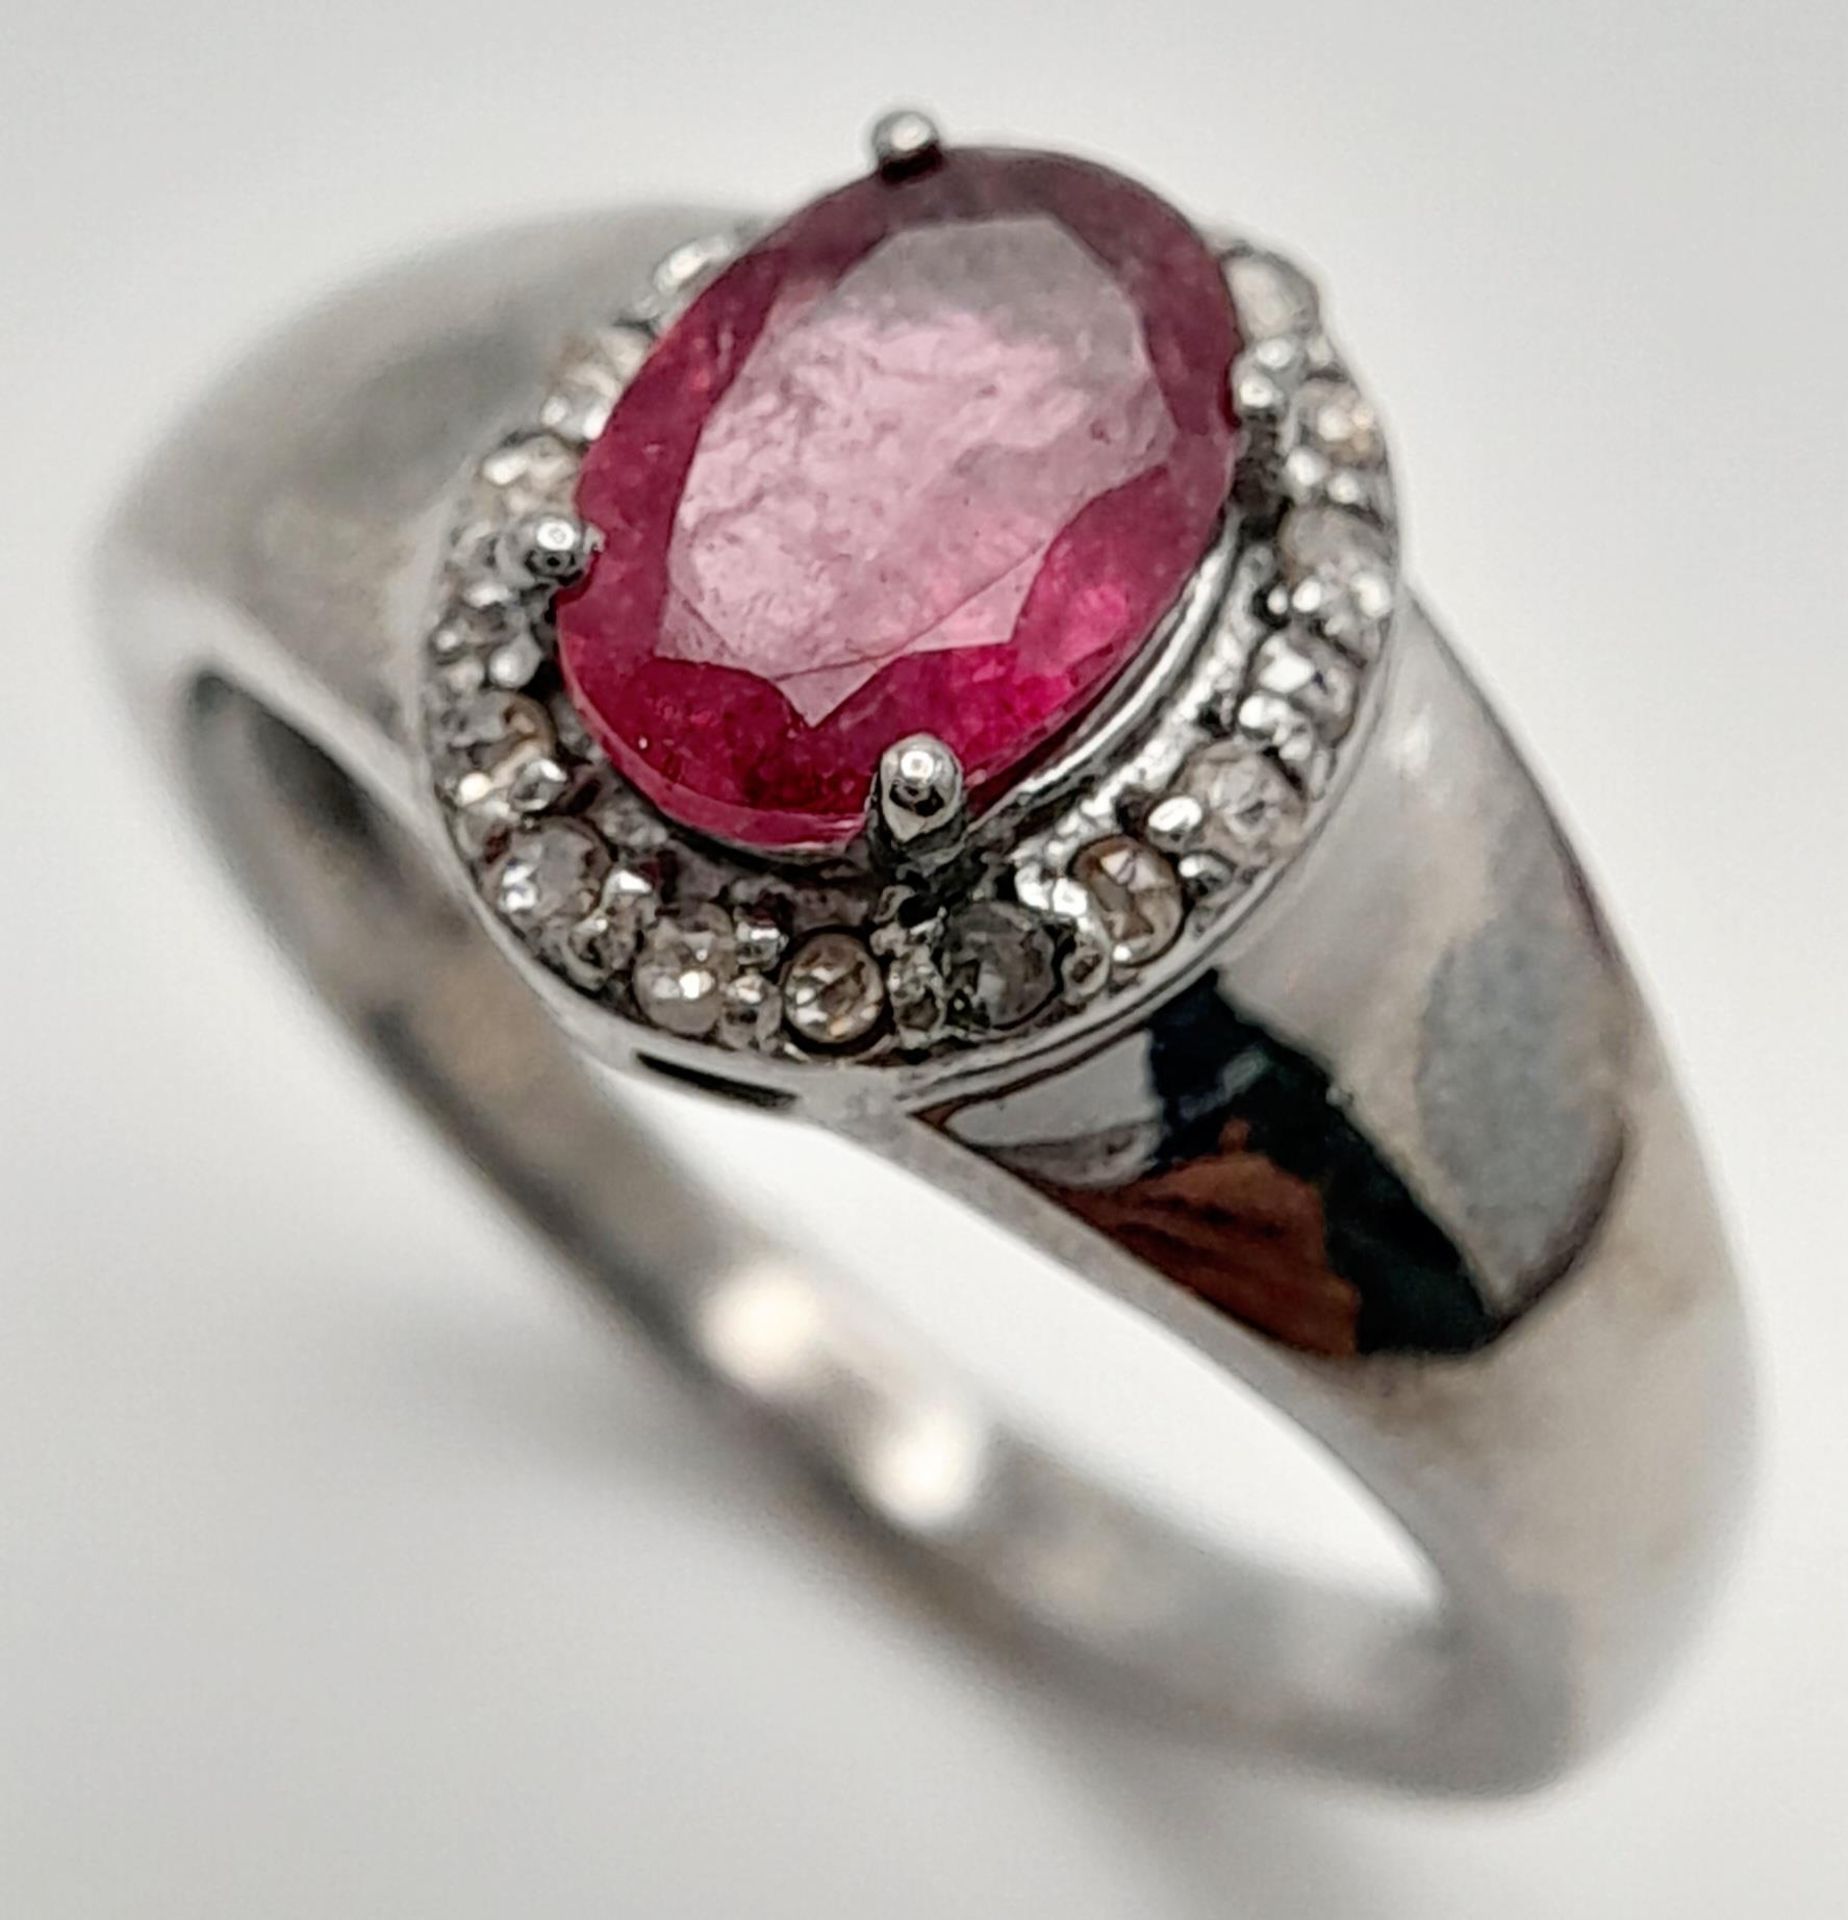 A Rhodolite Garnet and Diamond Ring, Oval cut rhodolite with rose cut diamond surround. Set in 925 - Image 2 of 5